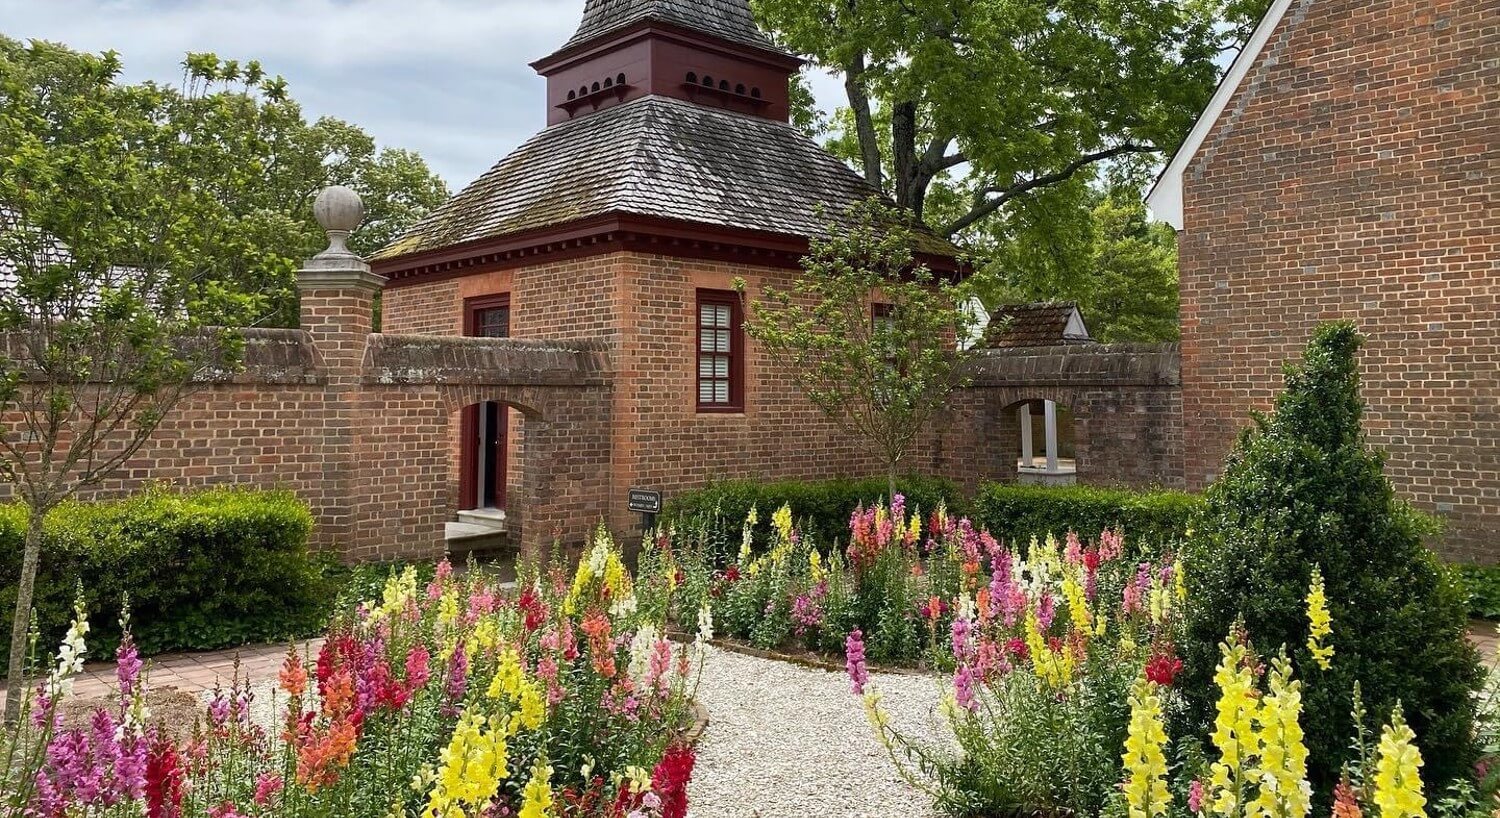 Historic brick building with gravel walkway through a garden of brightly colored flowers